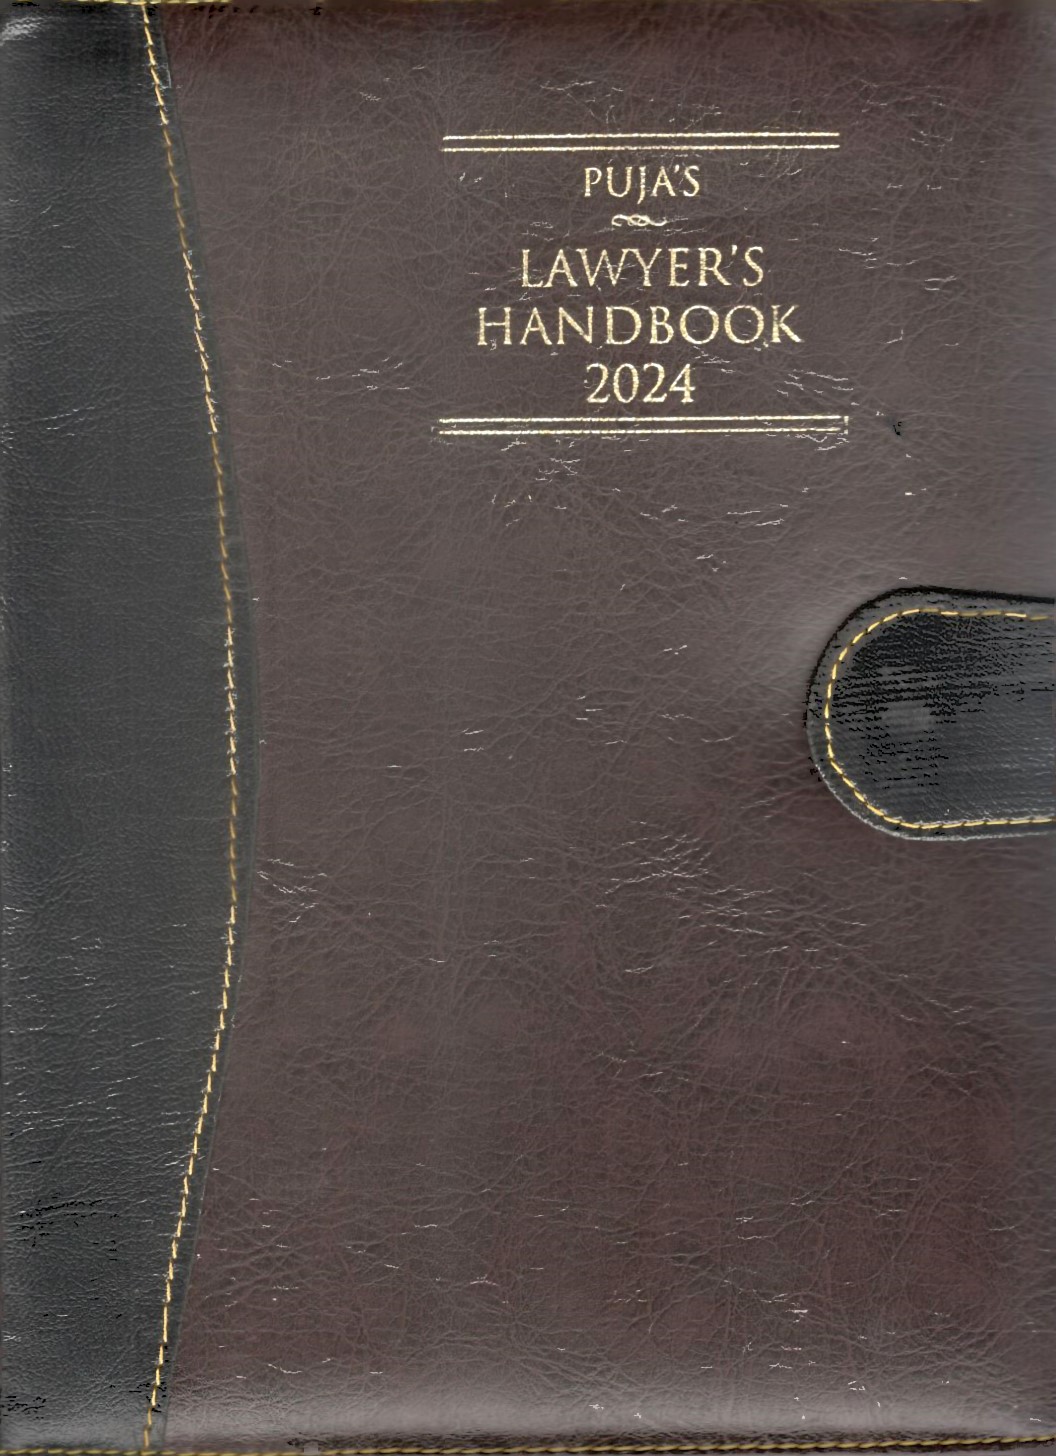  Buy Puja’s Lawyer’s Handbook 2024 - Brown Executive Big Size with Button